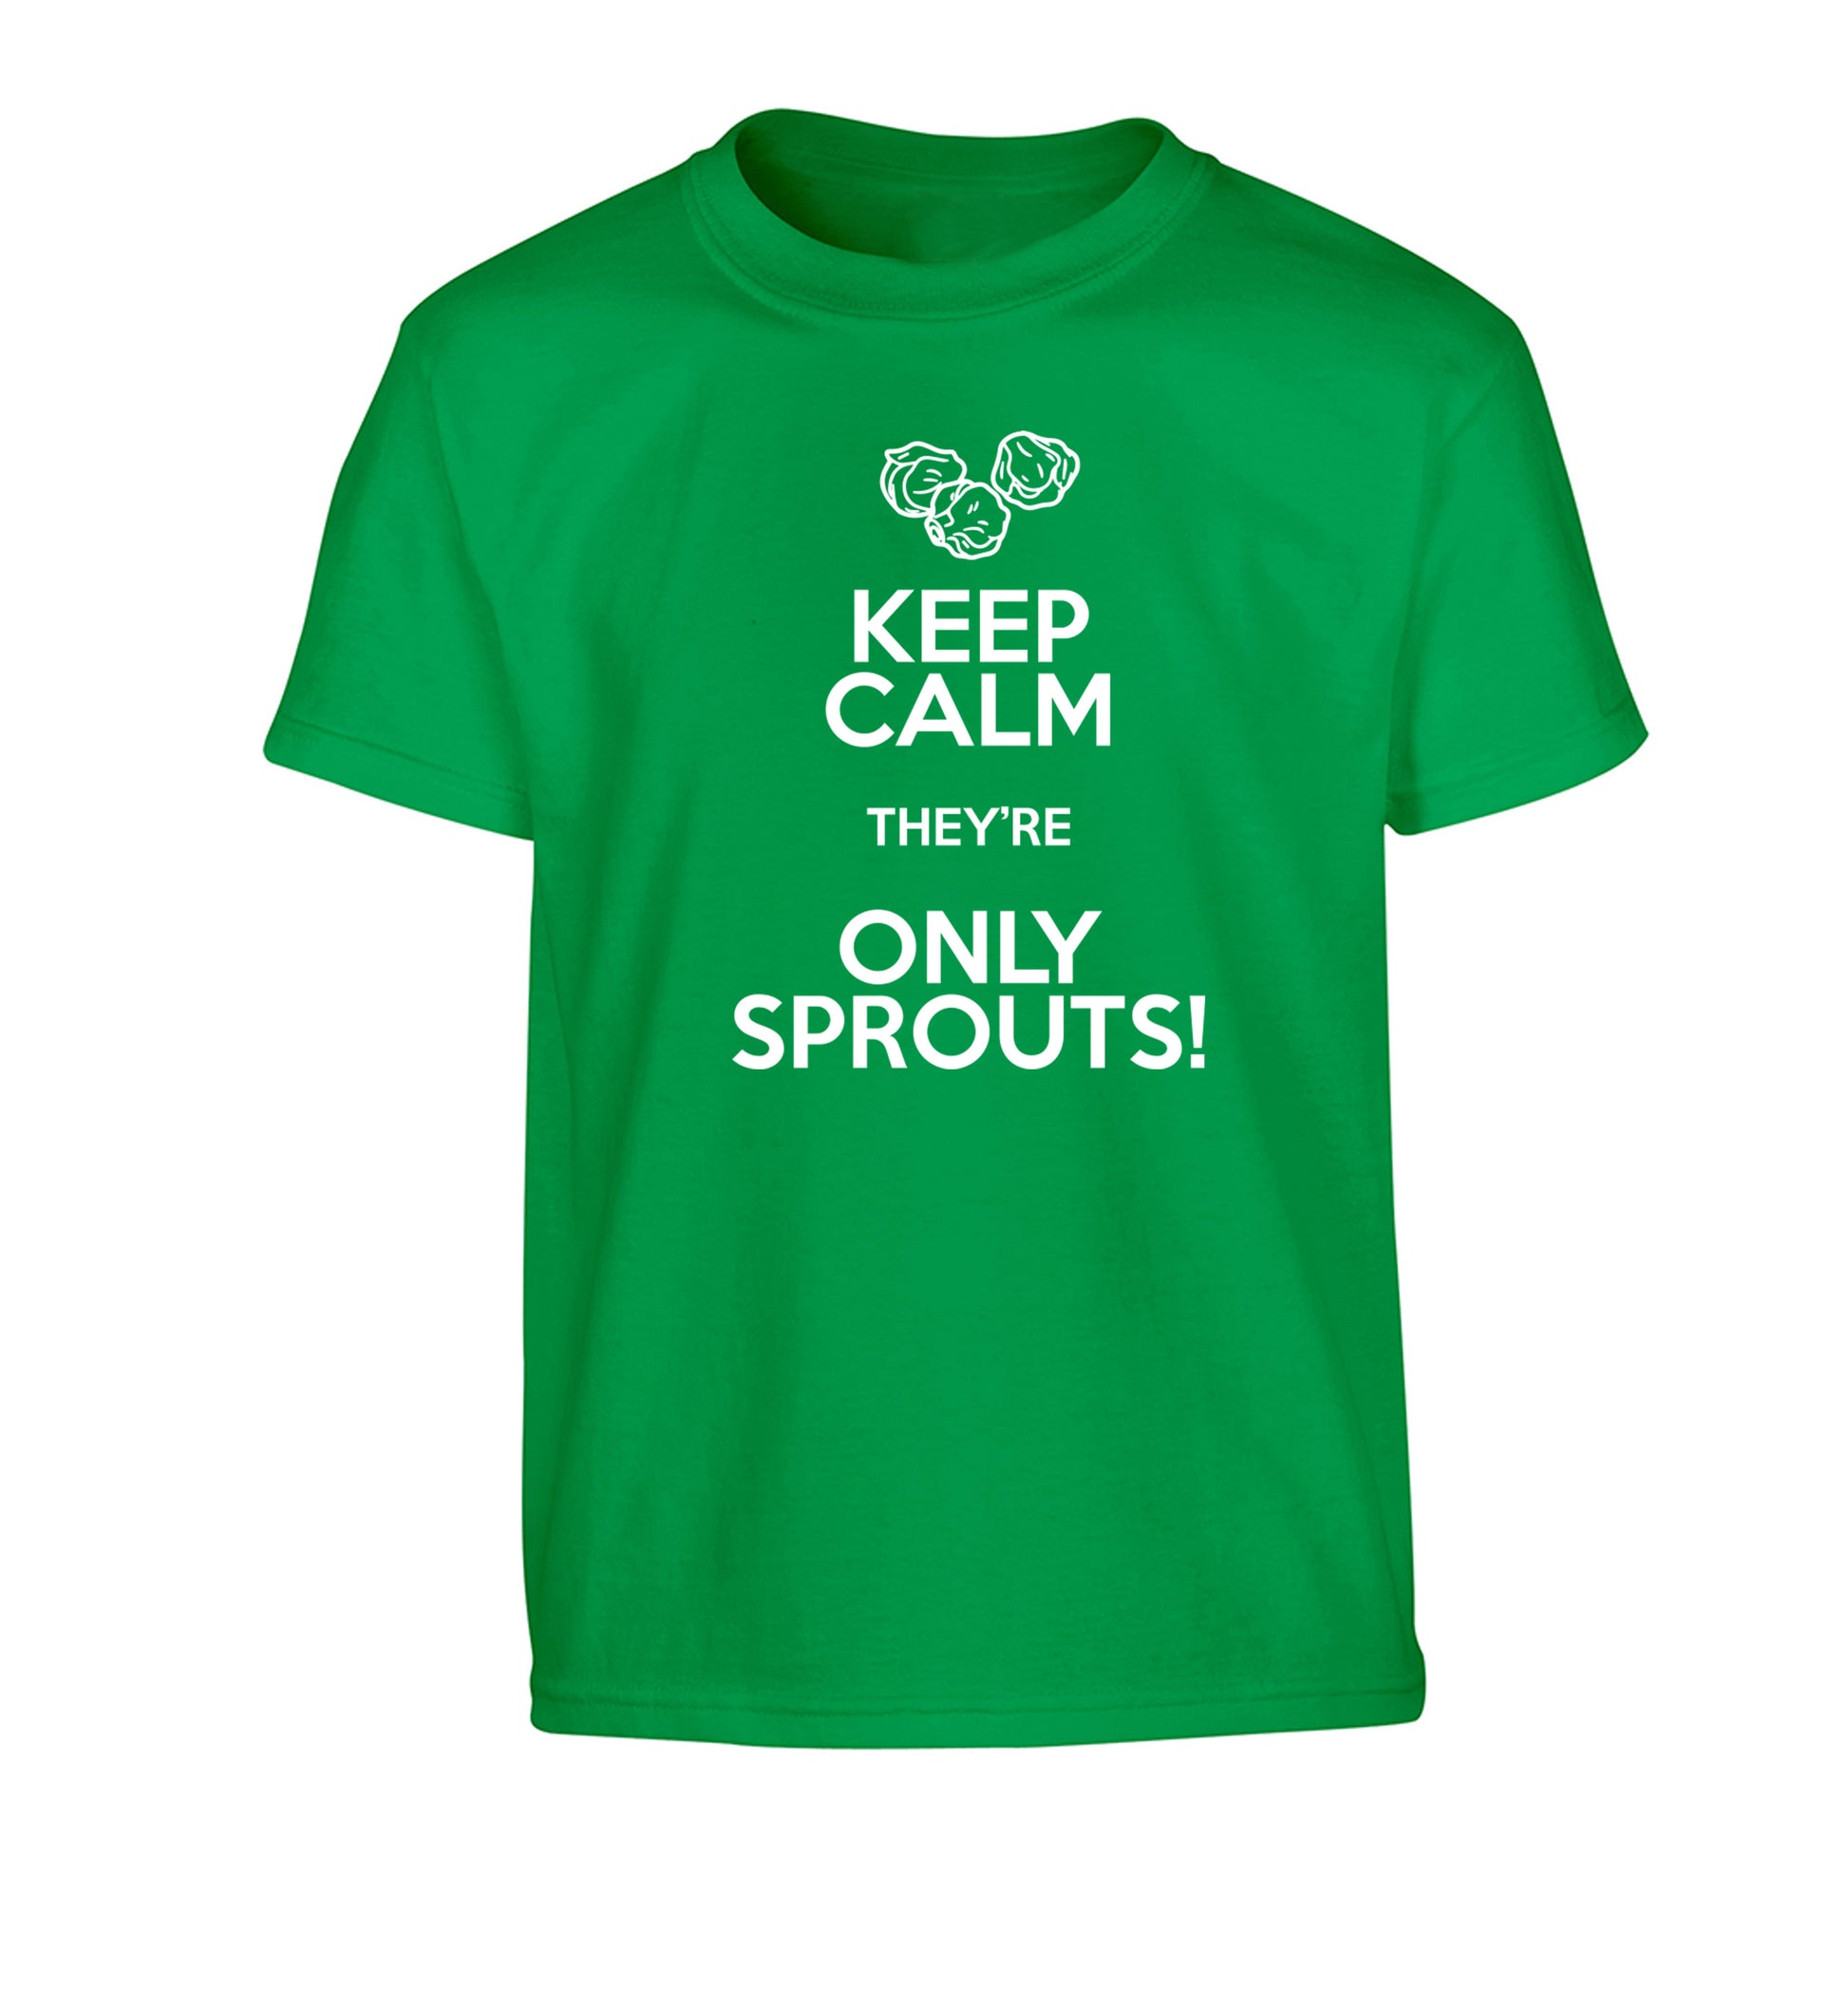 Keep calm they're only sprouts Children's green Tshirt 12-13 Years